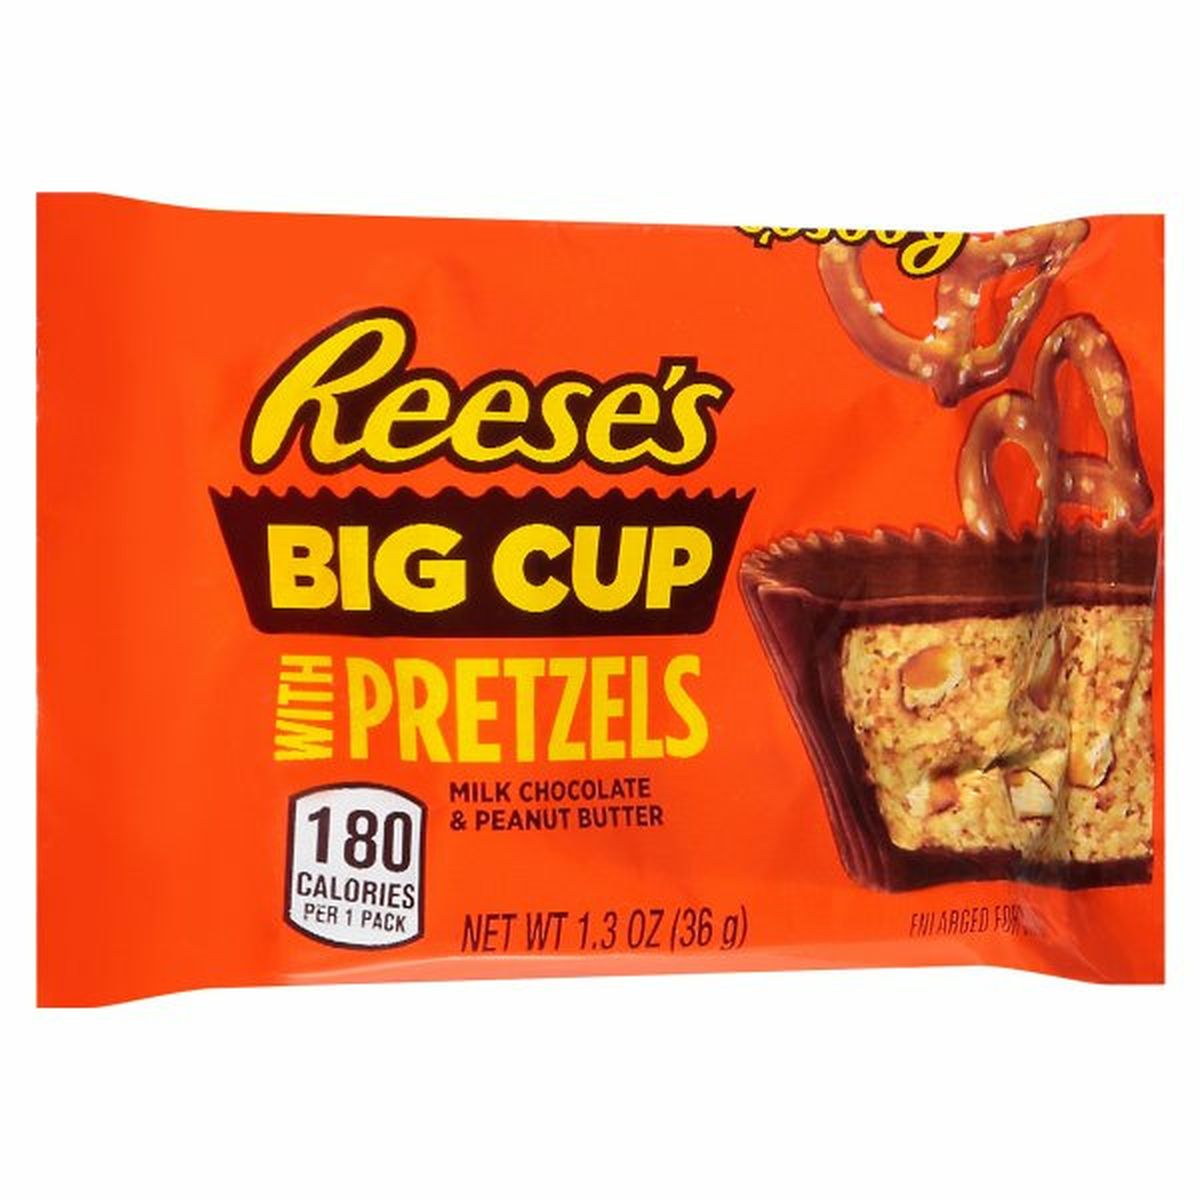 Calories in Reese's Big Cup with Pretzels, Milk Chocolate & Peanut Butter